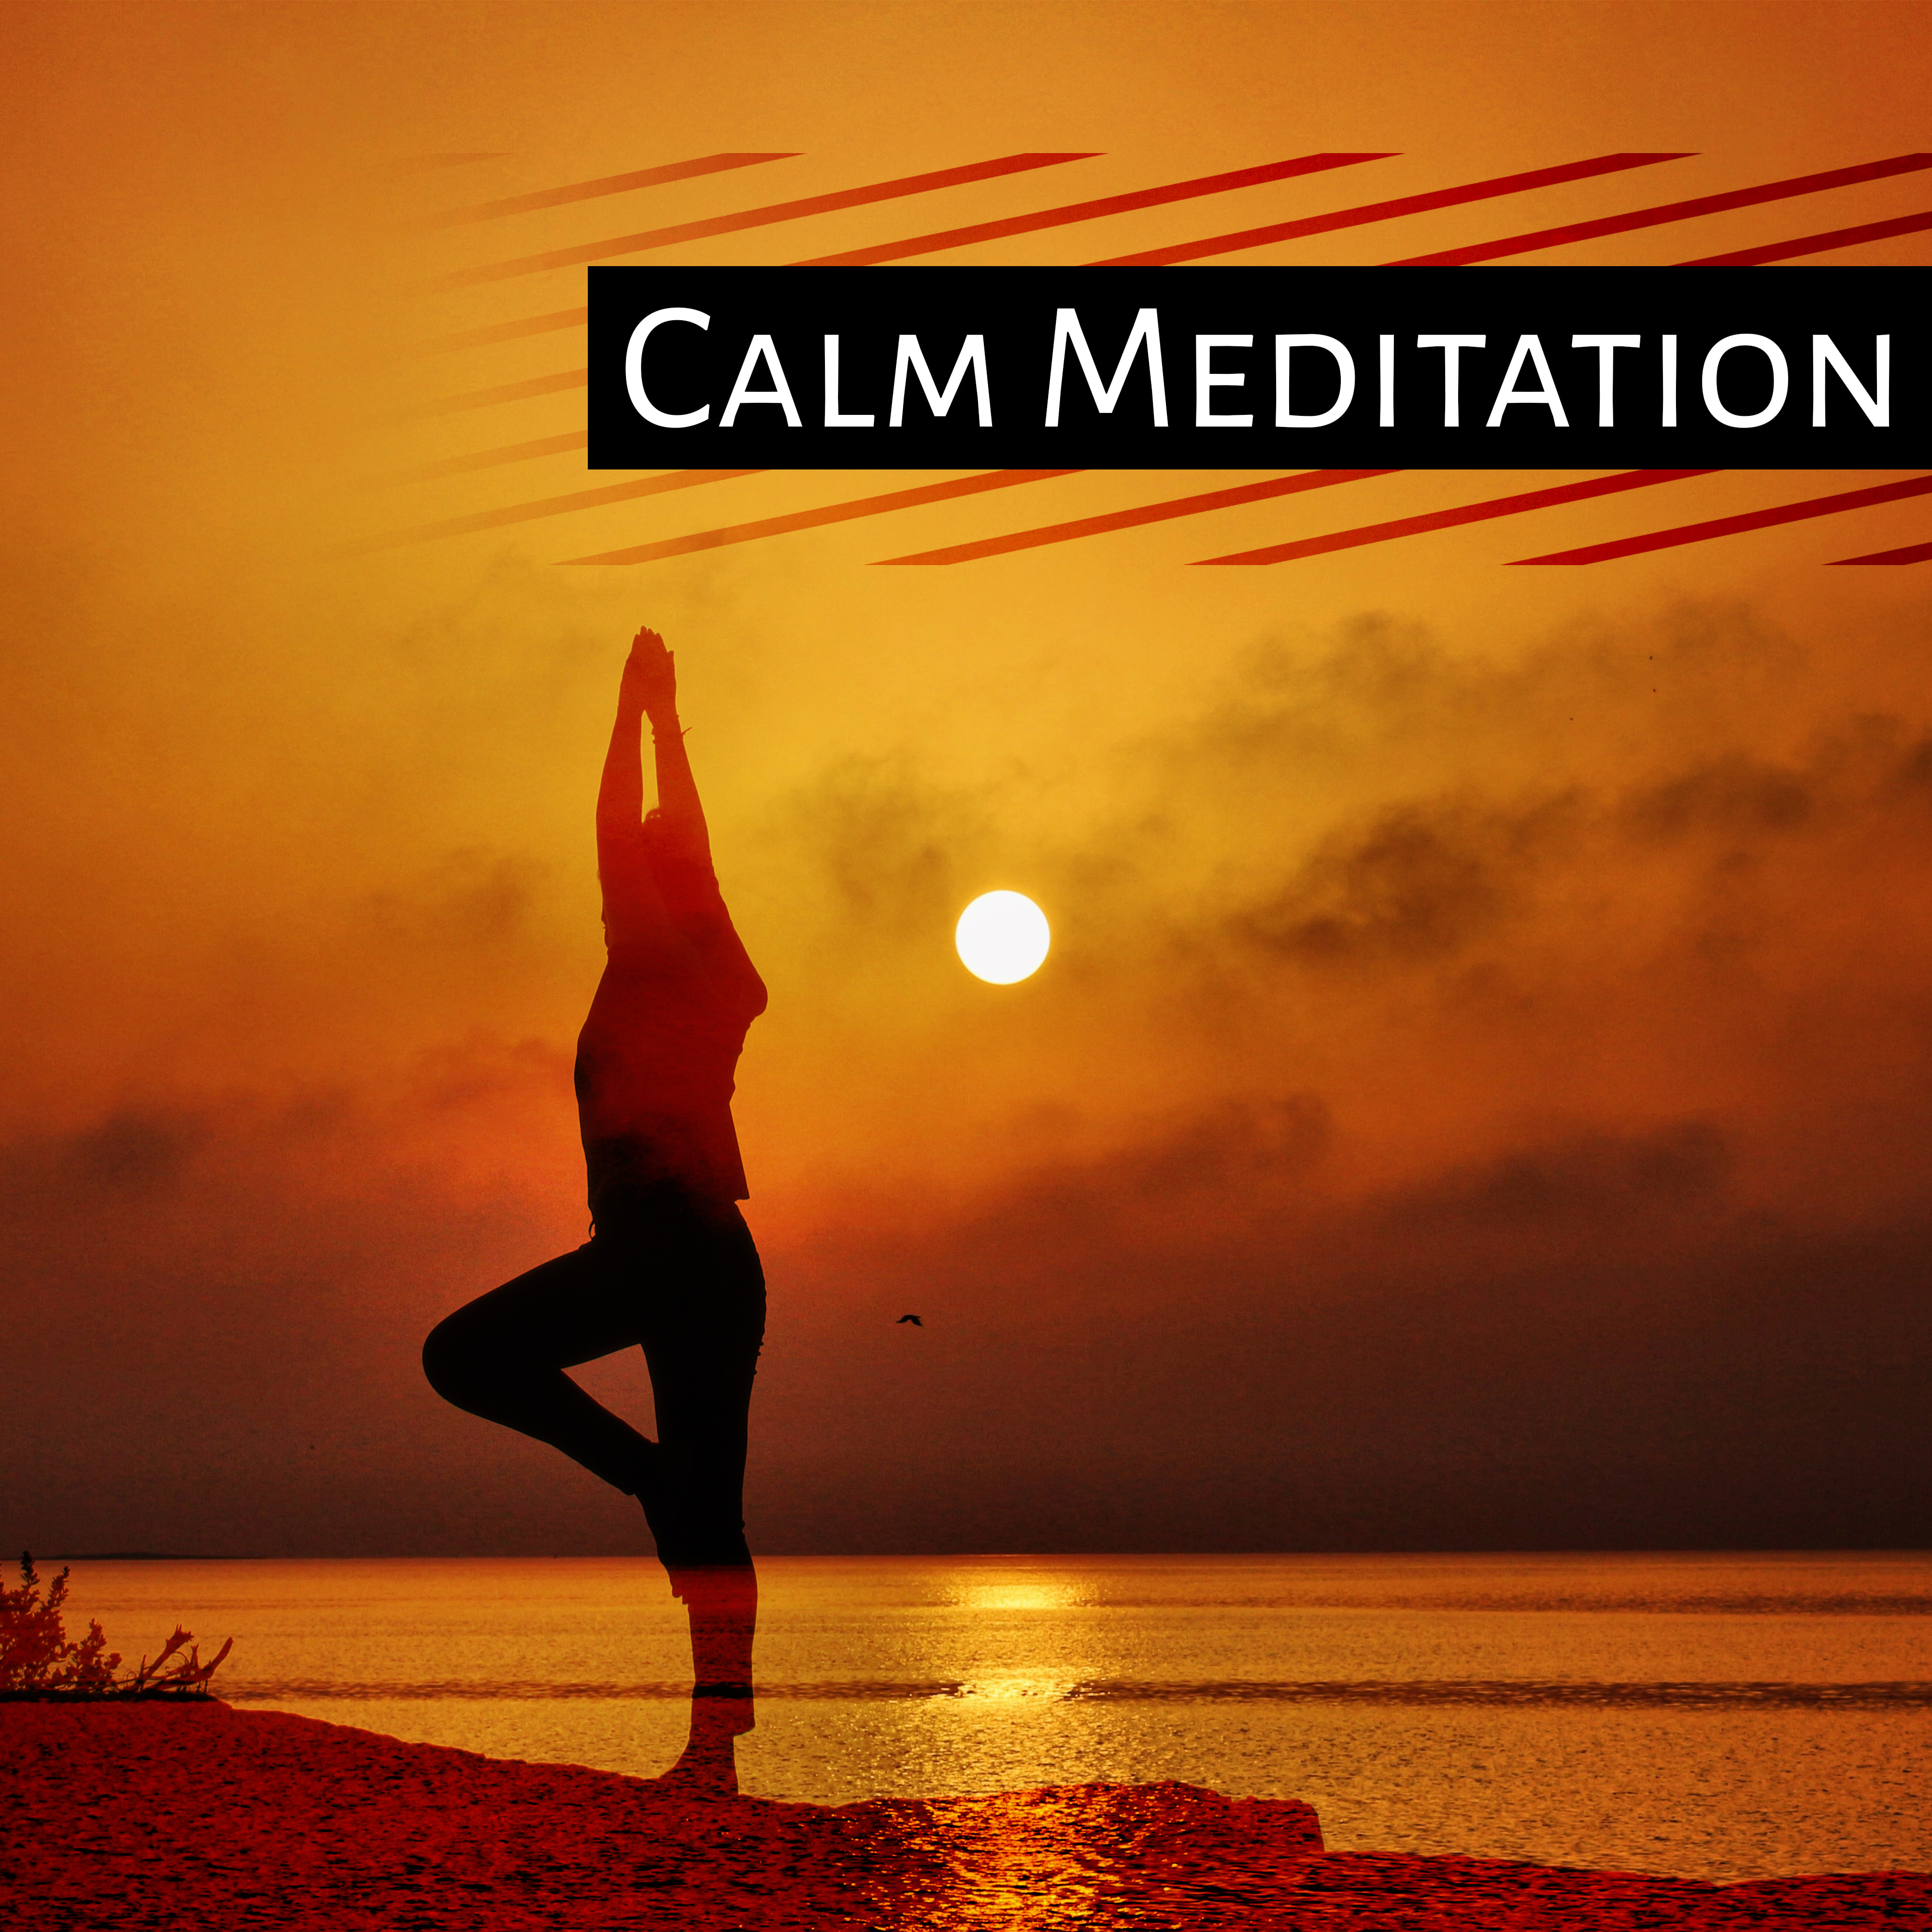 Calm Meditation  Training Yoga, Peaceful Music, Relaxation, Nature Sounds for Concentration, Stress Relief, Meditate